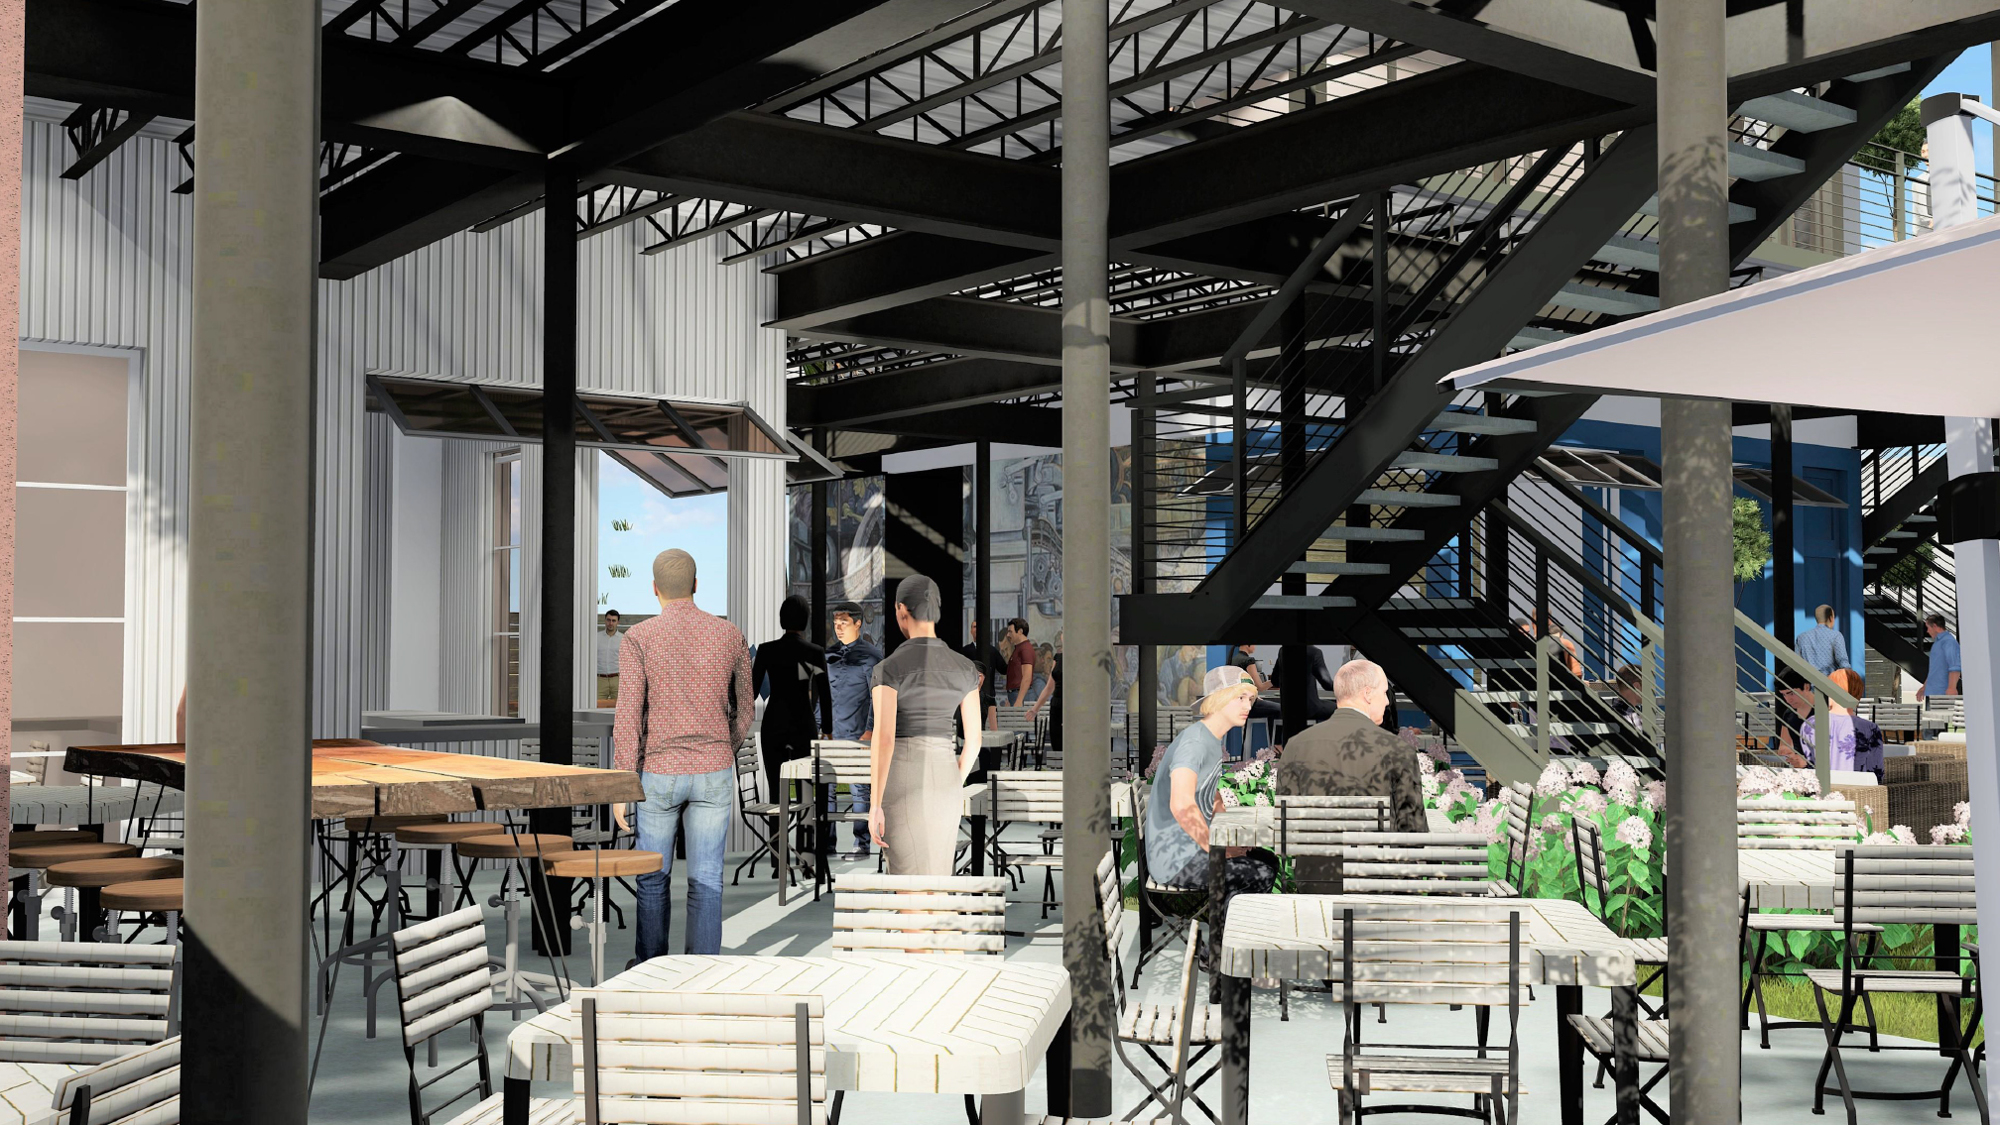 Plans show 2,593 square feet of outdoor dining and gathering space.